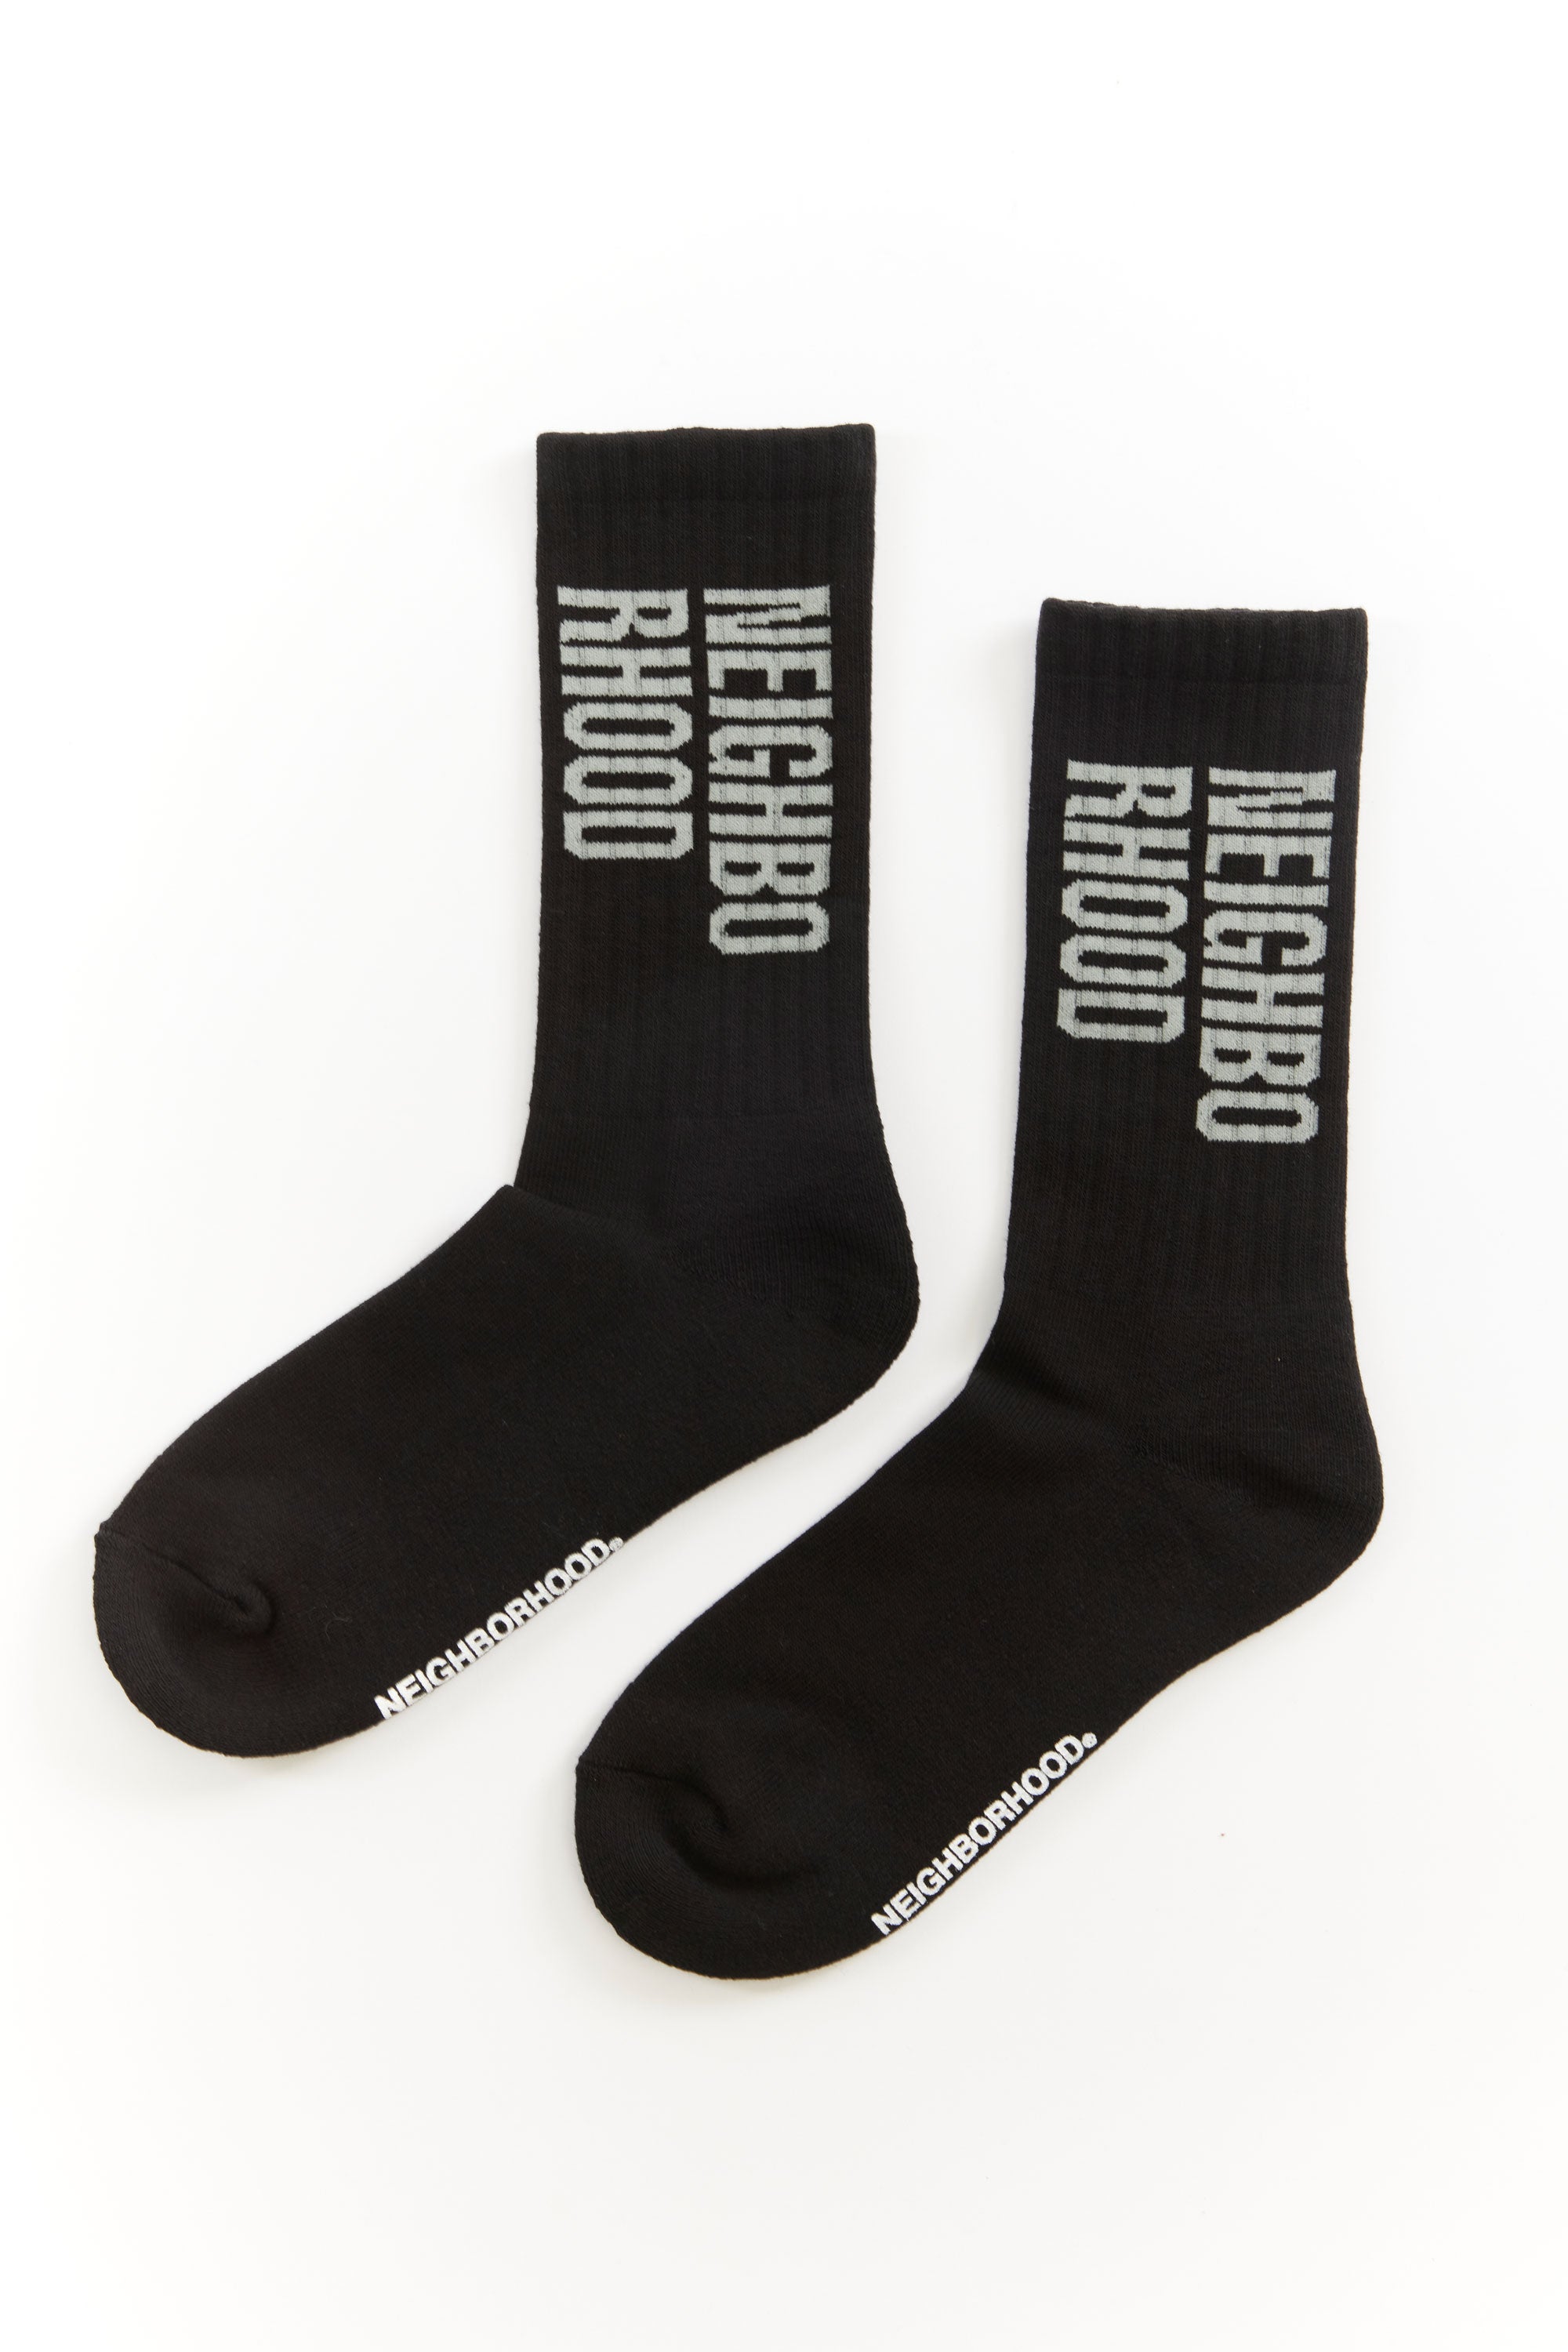 The NEIGHBORHOOD - ID LOGO SOCKS BLACK available online with global shipping, and in PAM Stores Melbourne and Sydney.